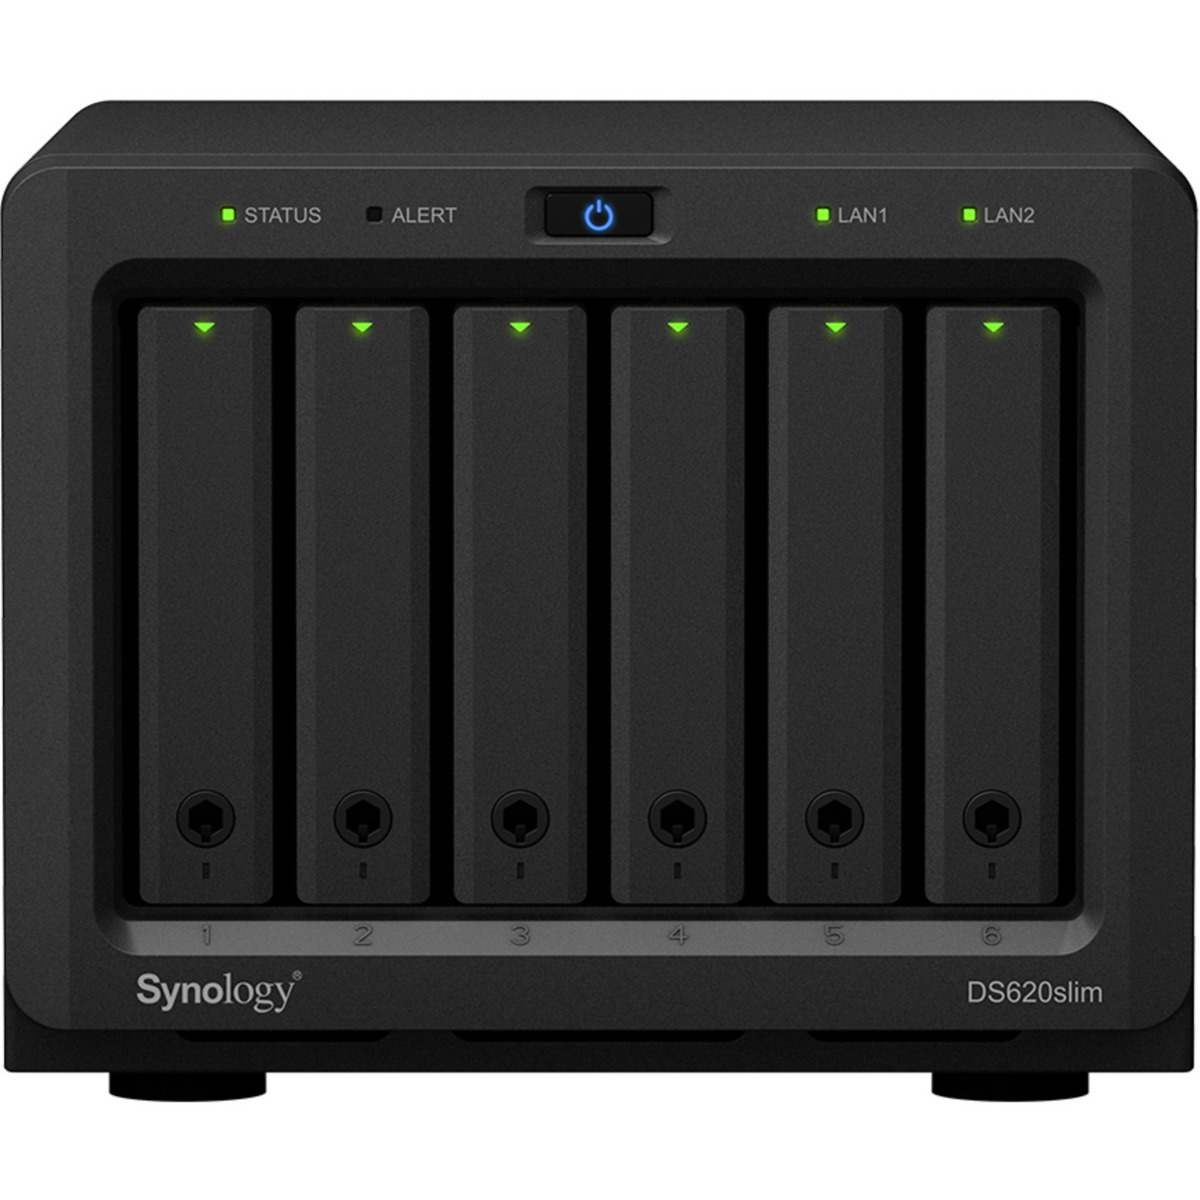 Synology DiskStation DS620slim 6tb 6-Bay Desktop Multimedia / Power User / Business NAS - Network Attached Storage Device 3x2tb Samsung 870 EVO MZ-77E2T0BAM 2.5 560/530MB/s SATA 6Gb/s SSD CONSUMER Class Drives Installed - Burn-In Tested - FREE RAM UPGRADE DiskStation DS620slim